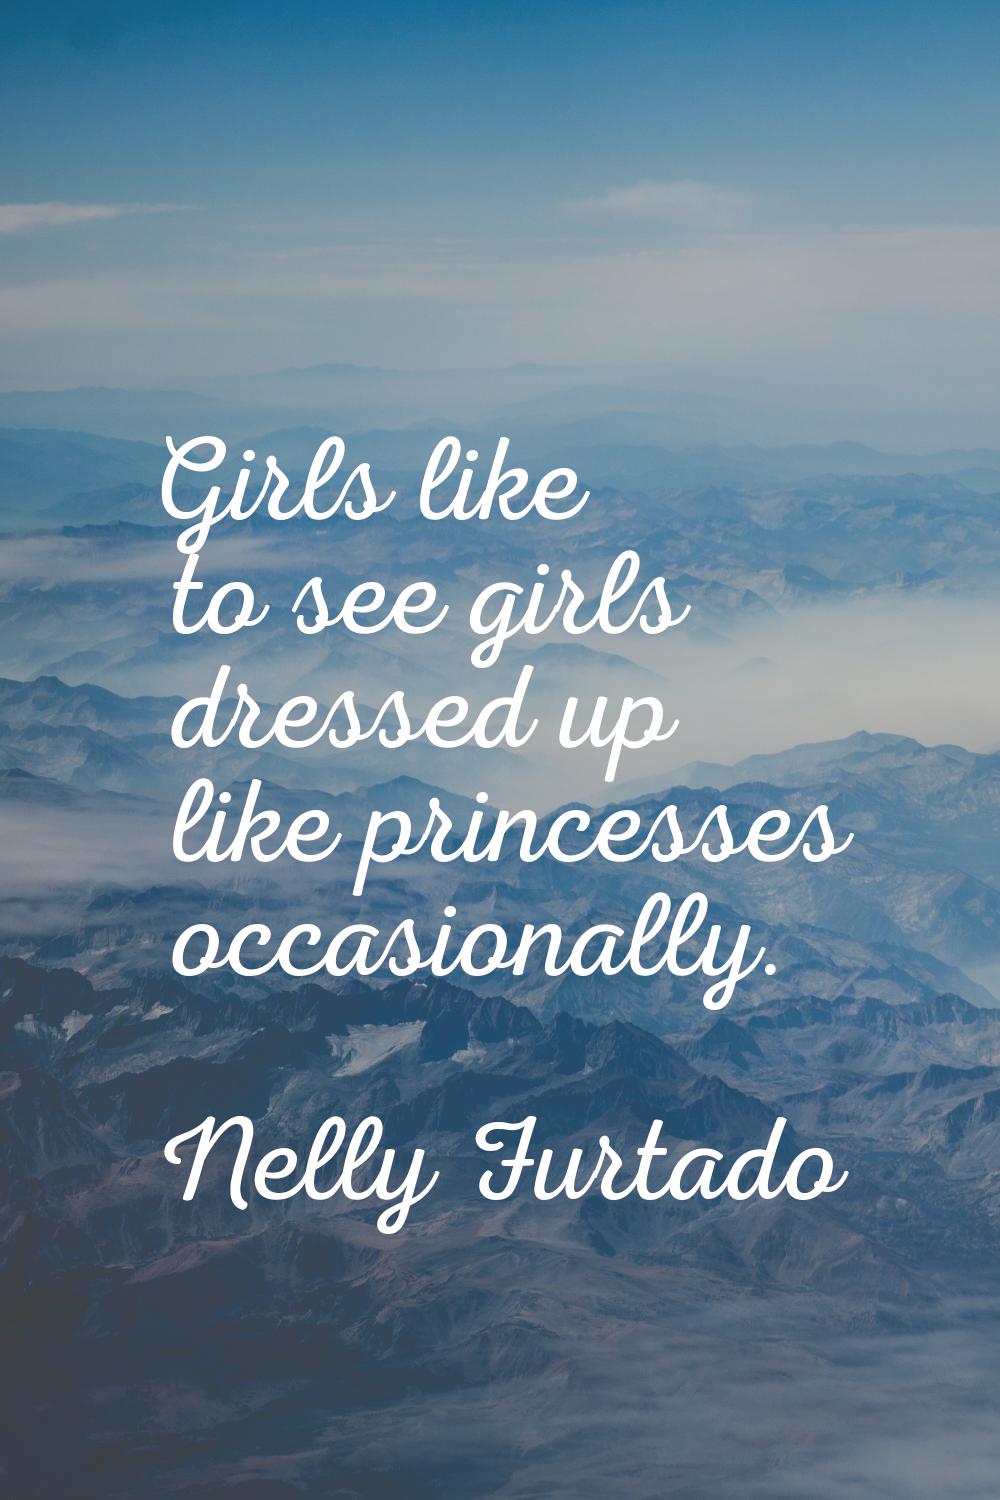 Girls like to see girls dressed up like princesses occasionally.